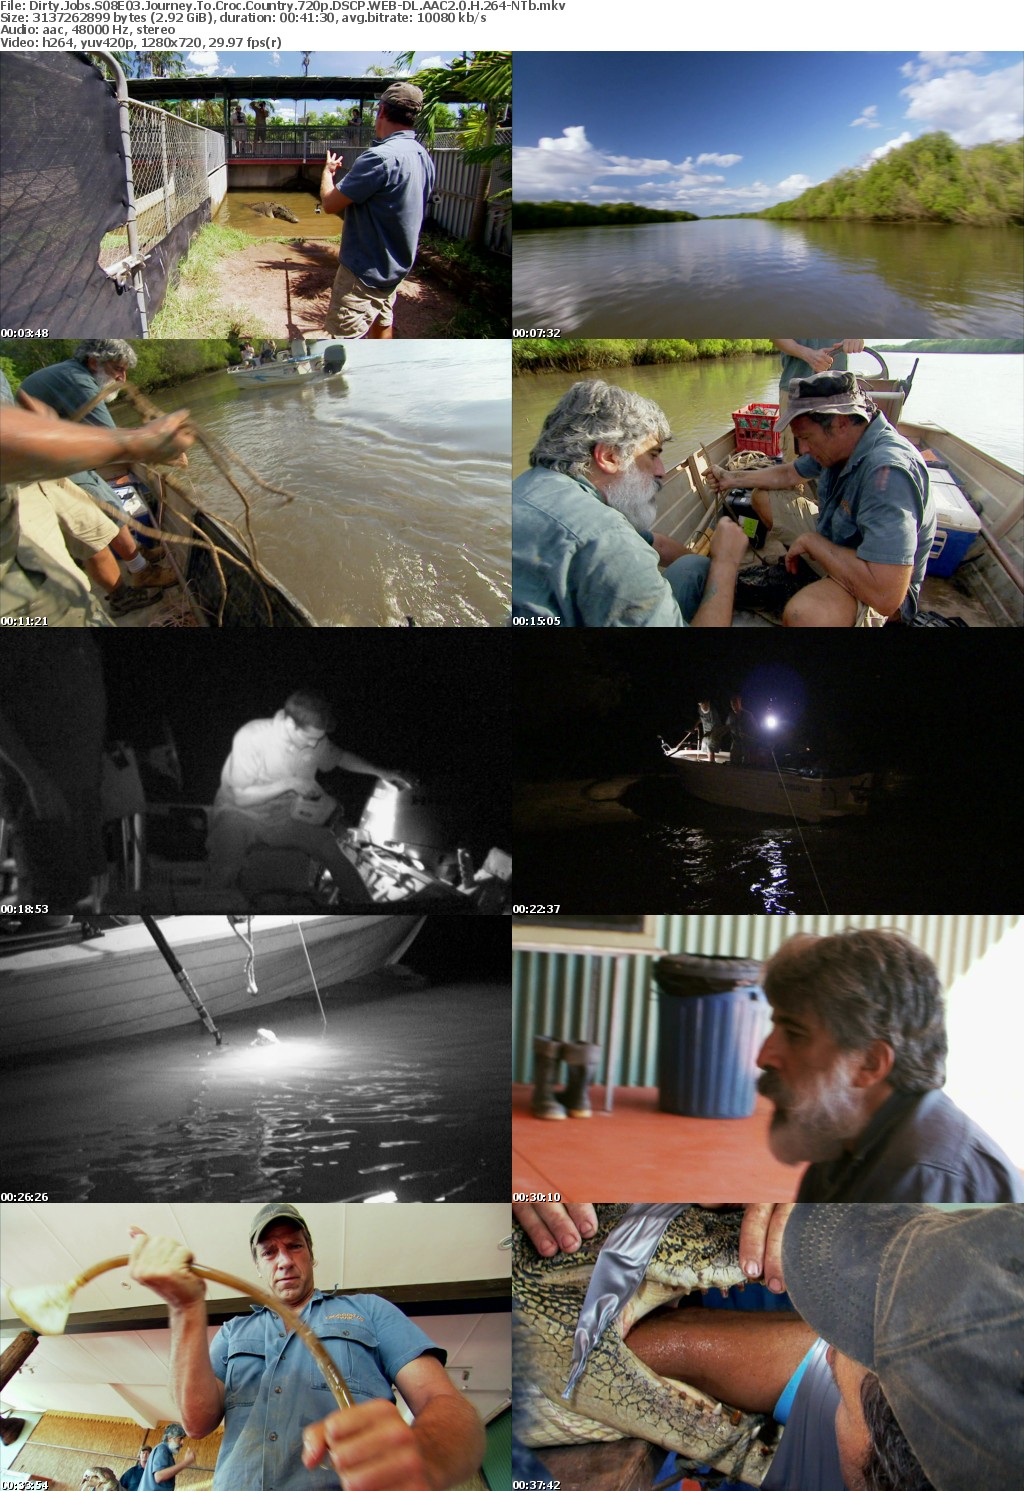 Dirty Jobs S08E03 Journey To Croc Country 720p DSCP WEB-DL AAC2 0 H 264-NTb